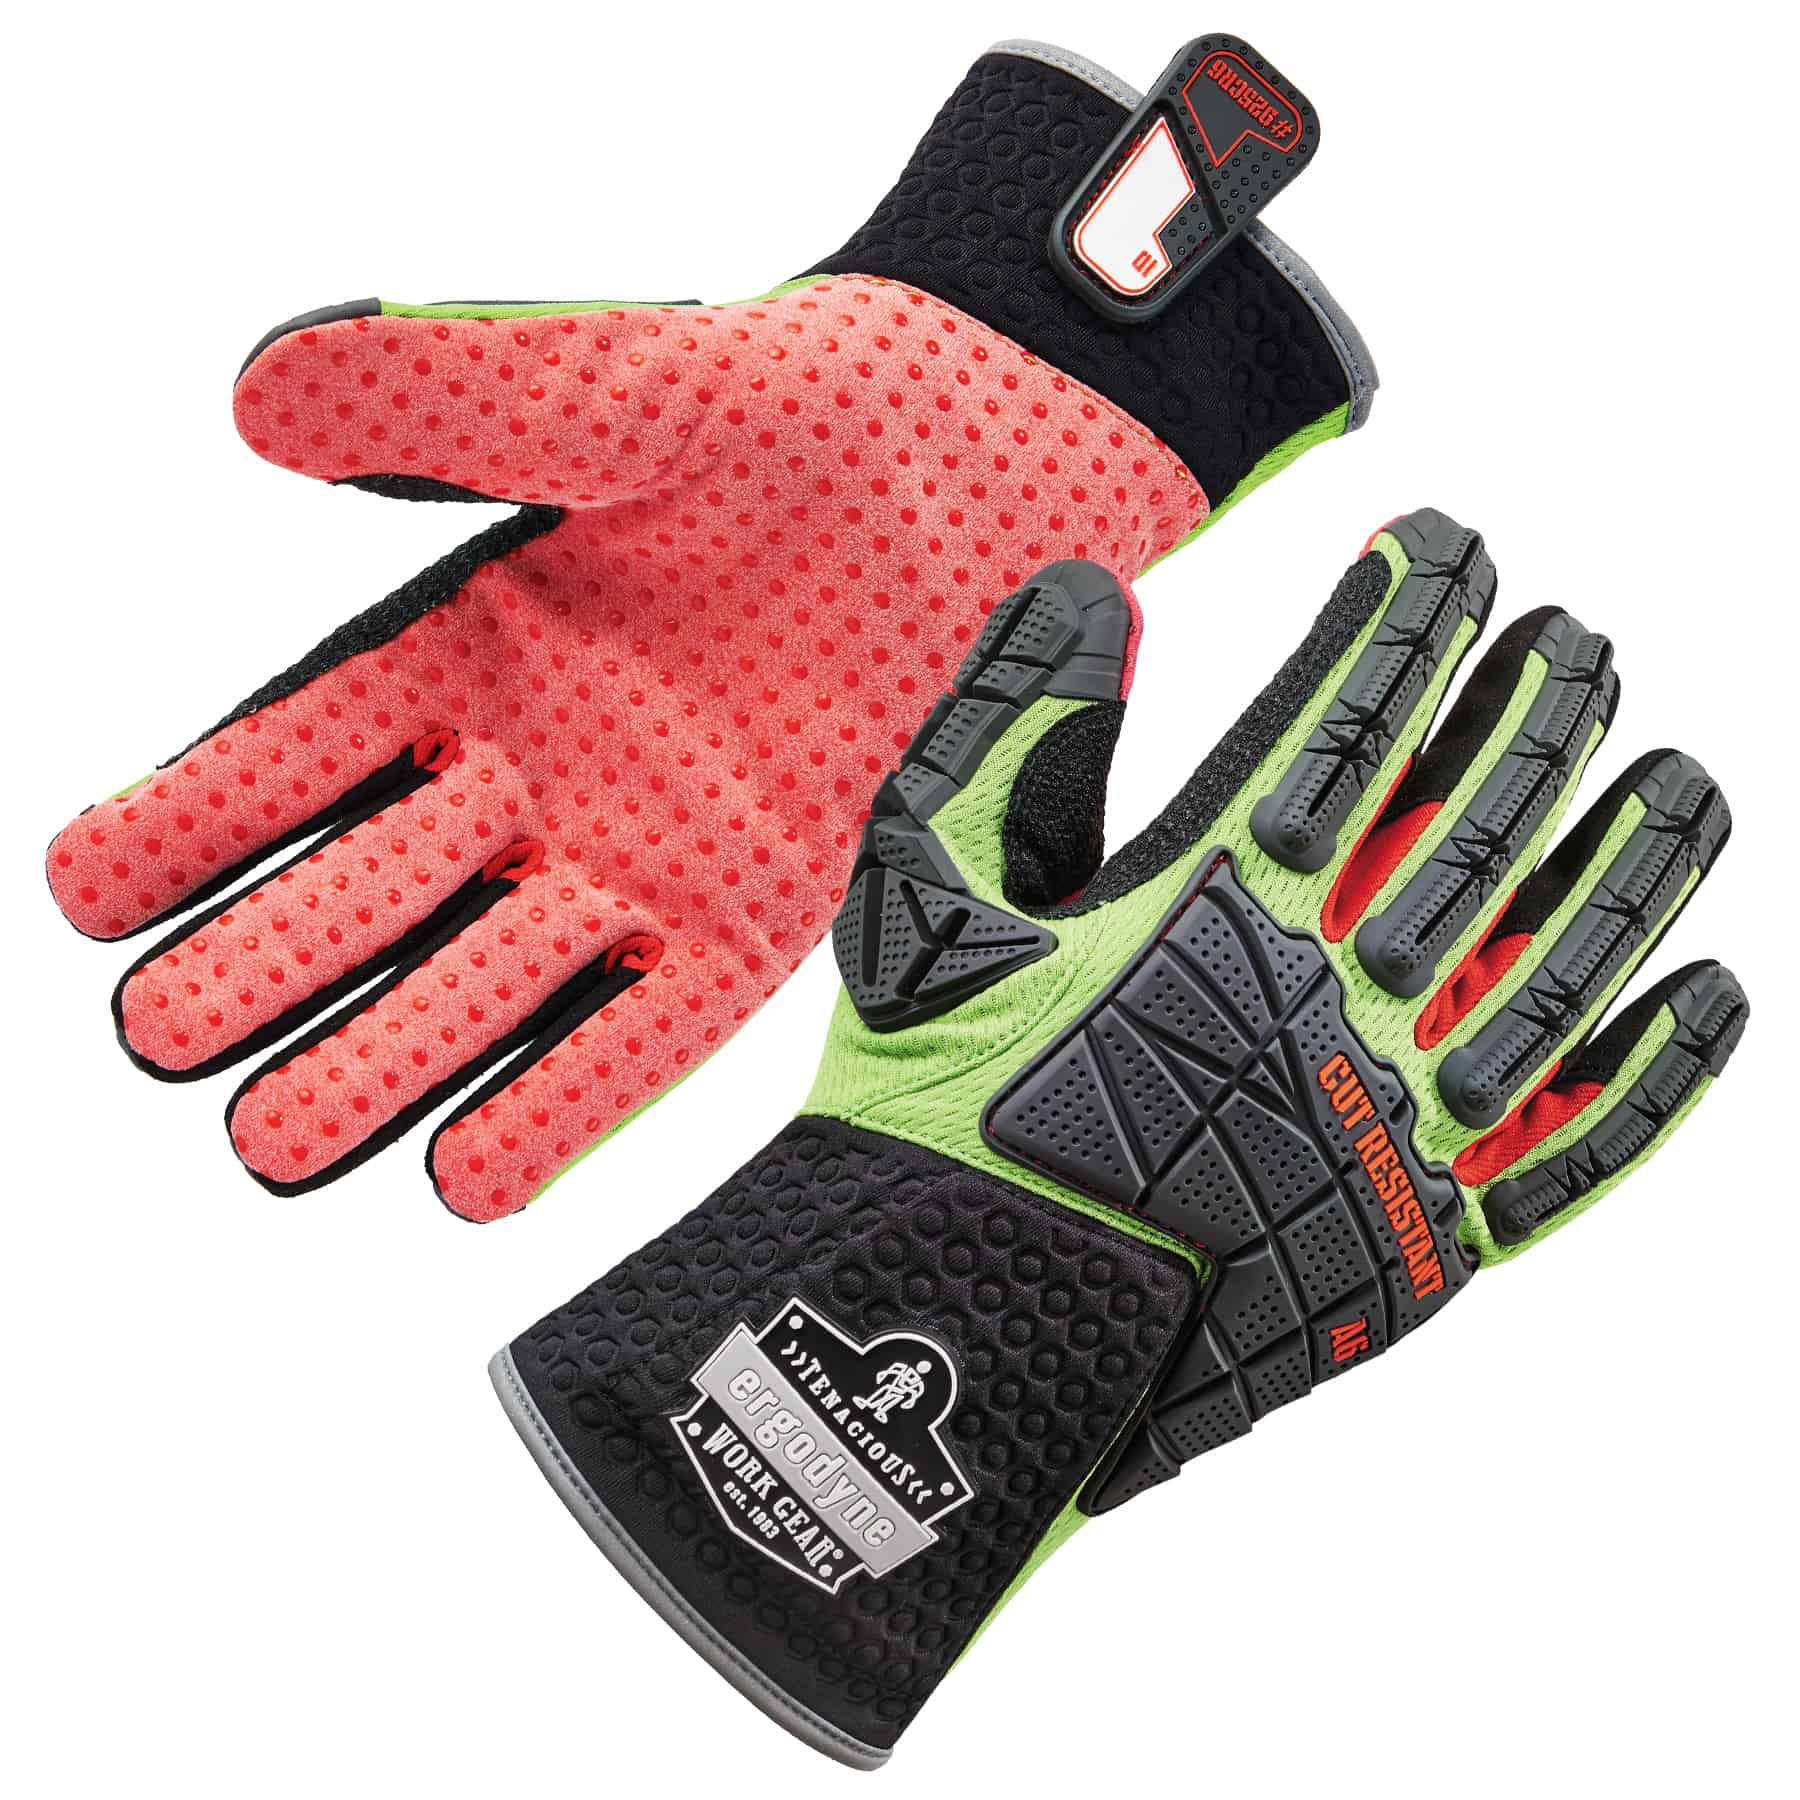 https://www.ergodyne.com/sites/default/files/product-images/17292-925cr6-performance-dorsal-impact-reducing-cut-resistance-gloves-paired.jpg